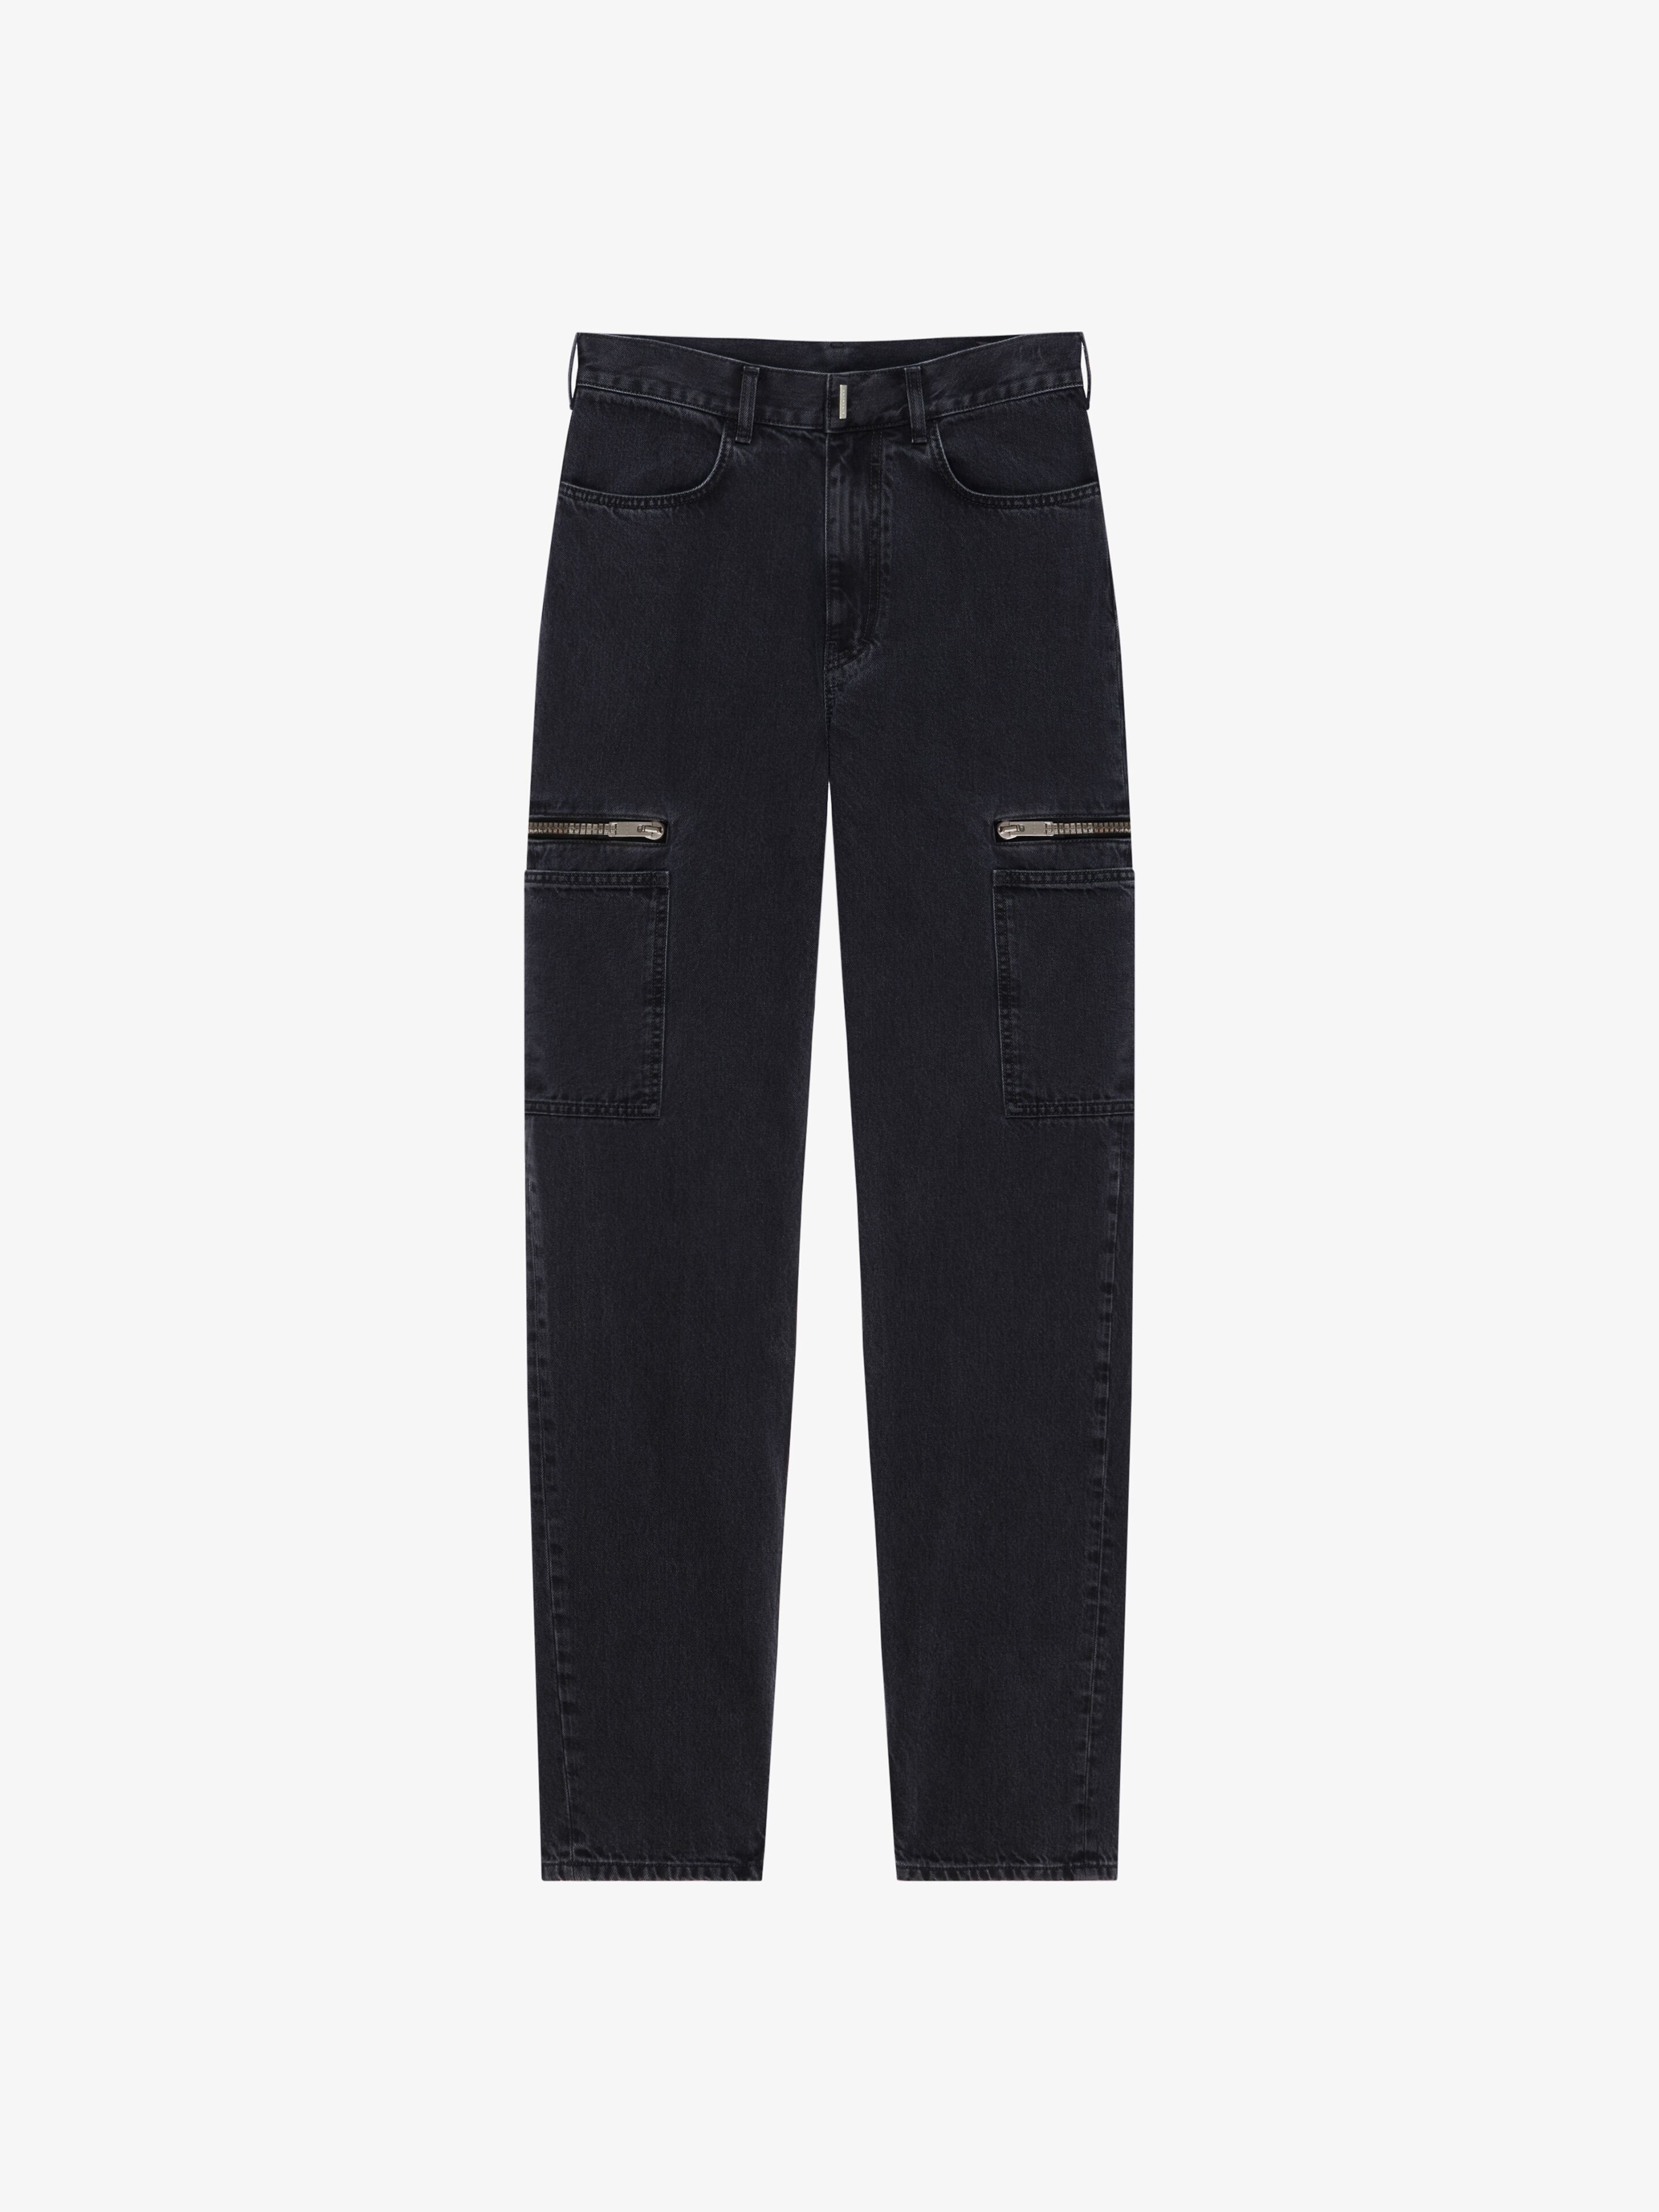 GIVENCHY CARGO PANTS IN DENIM